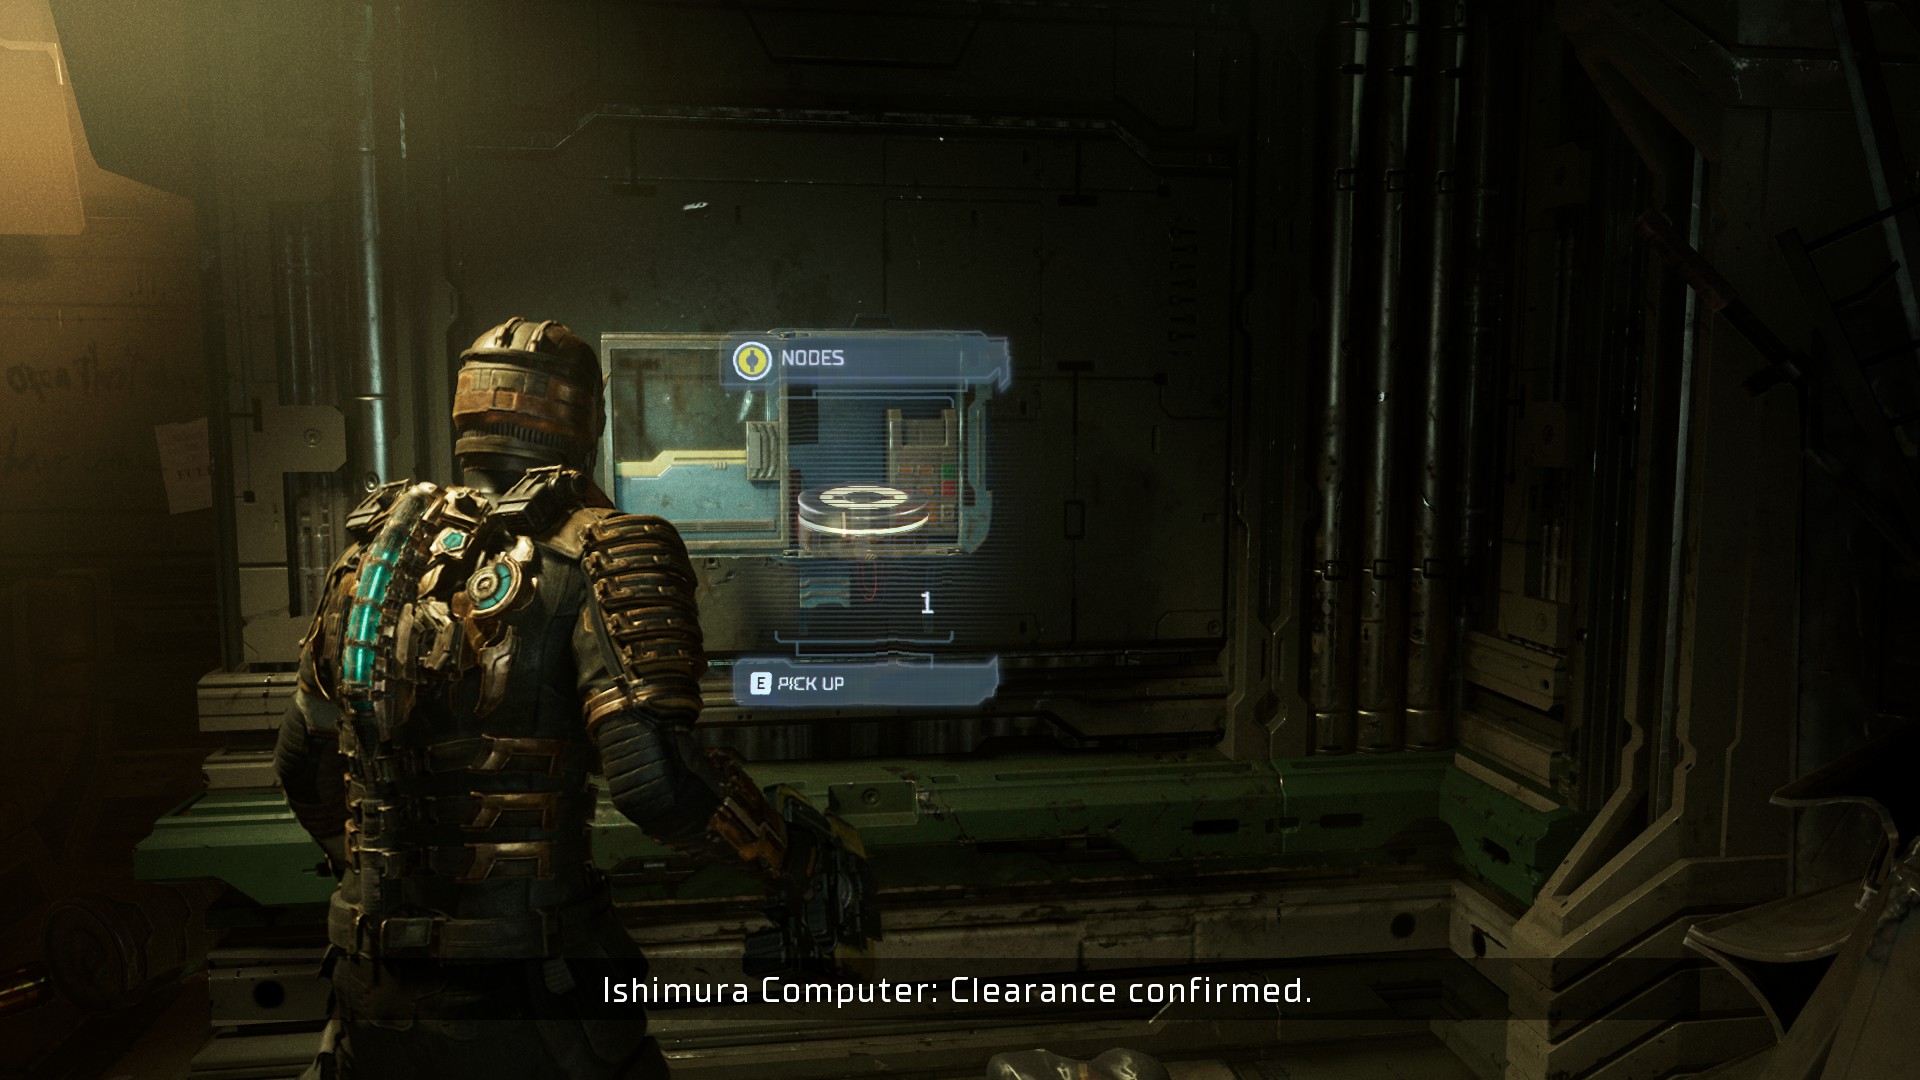 Dead Space' - The Collectable Documents That Add More Storytelling